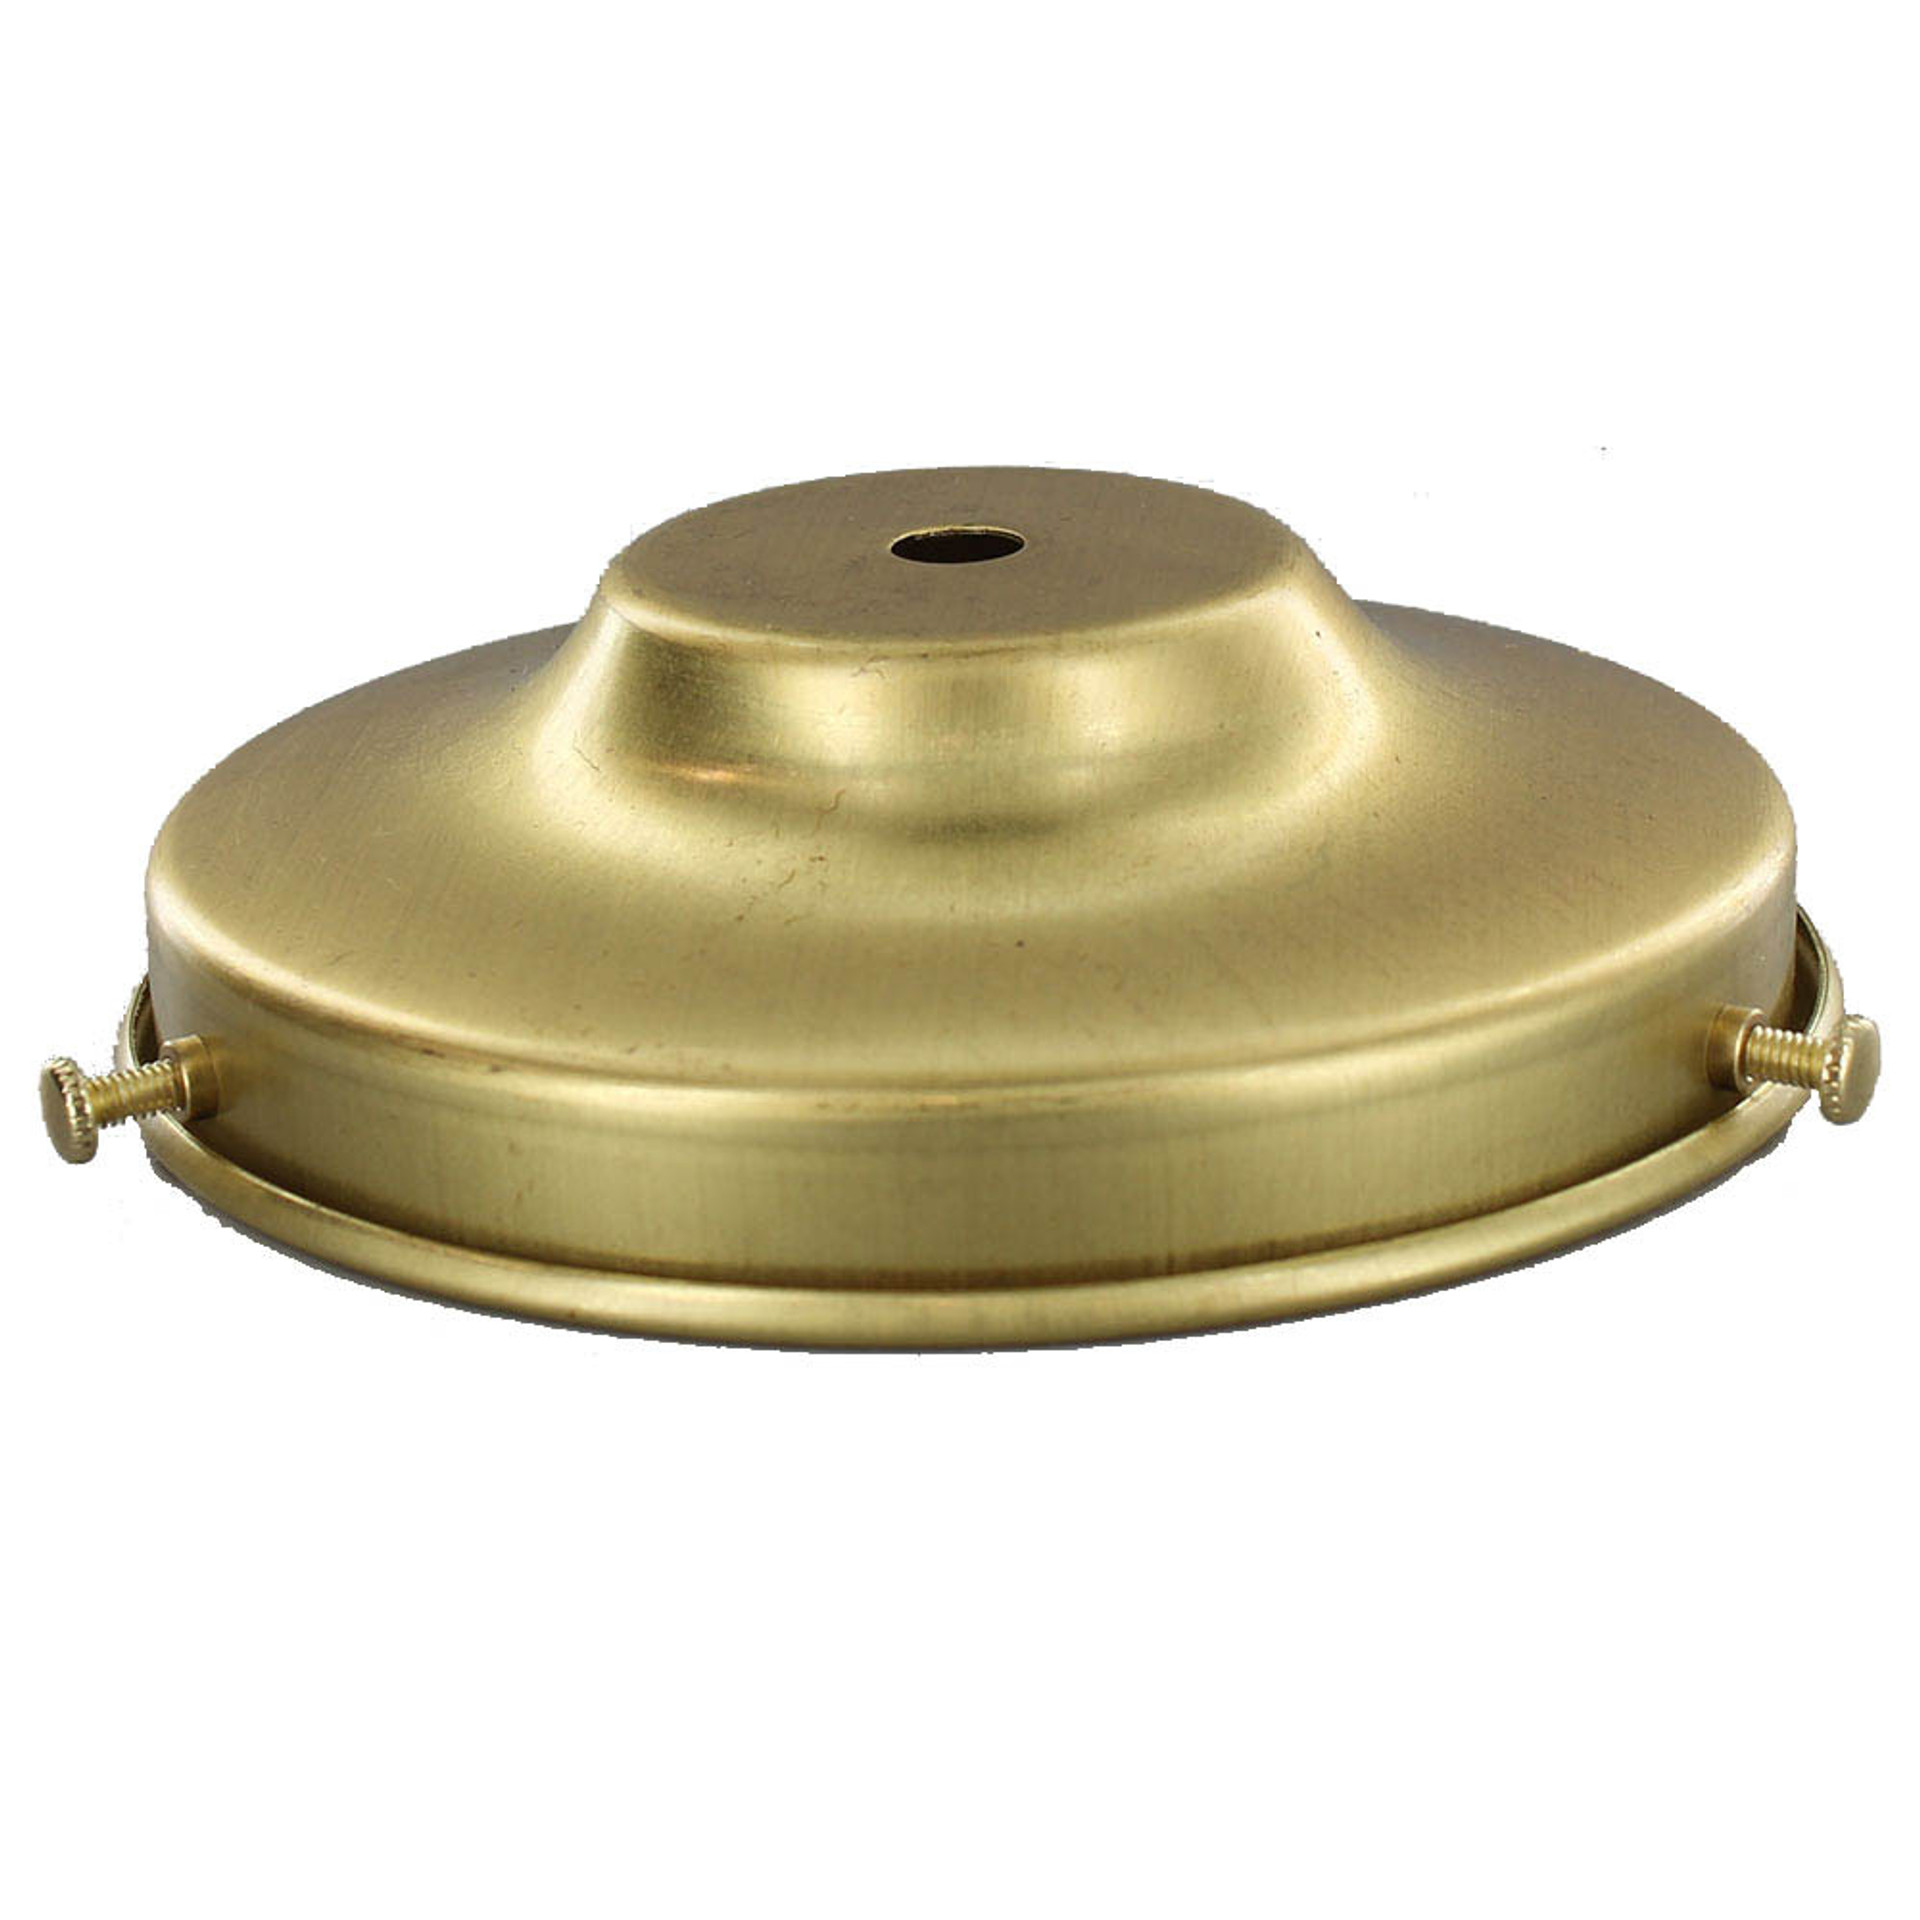 Lamp Shade Holders - Lamp Shade Fitters | Grand Brass Lamp Parts, LLC.